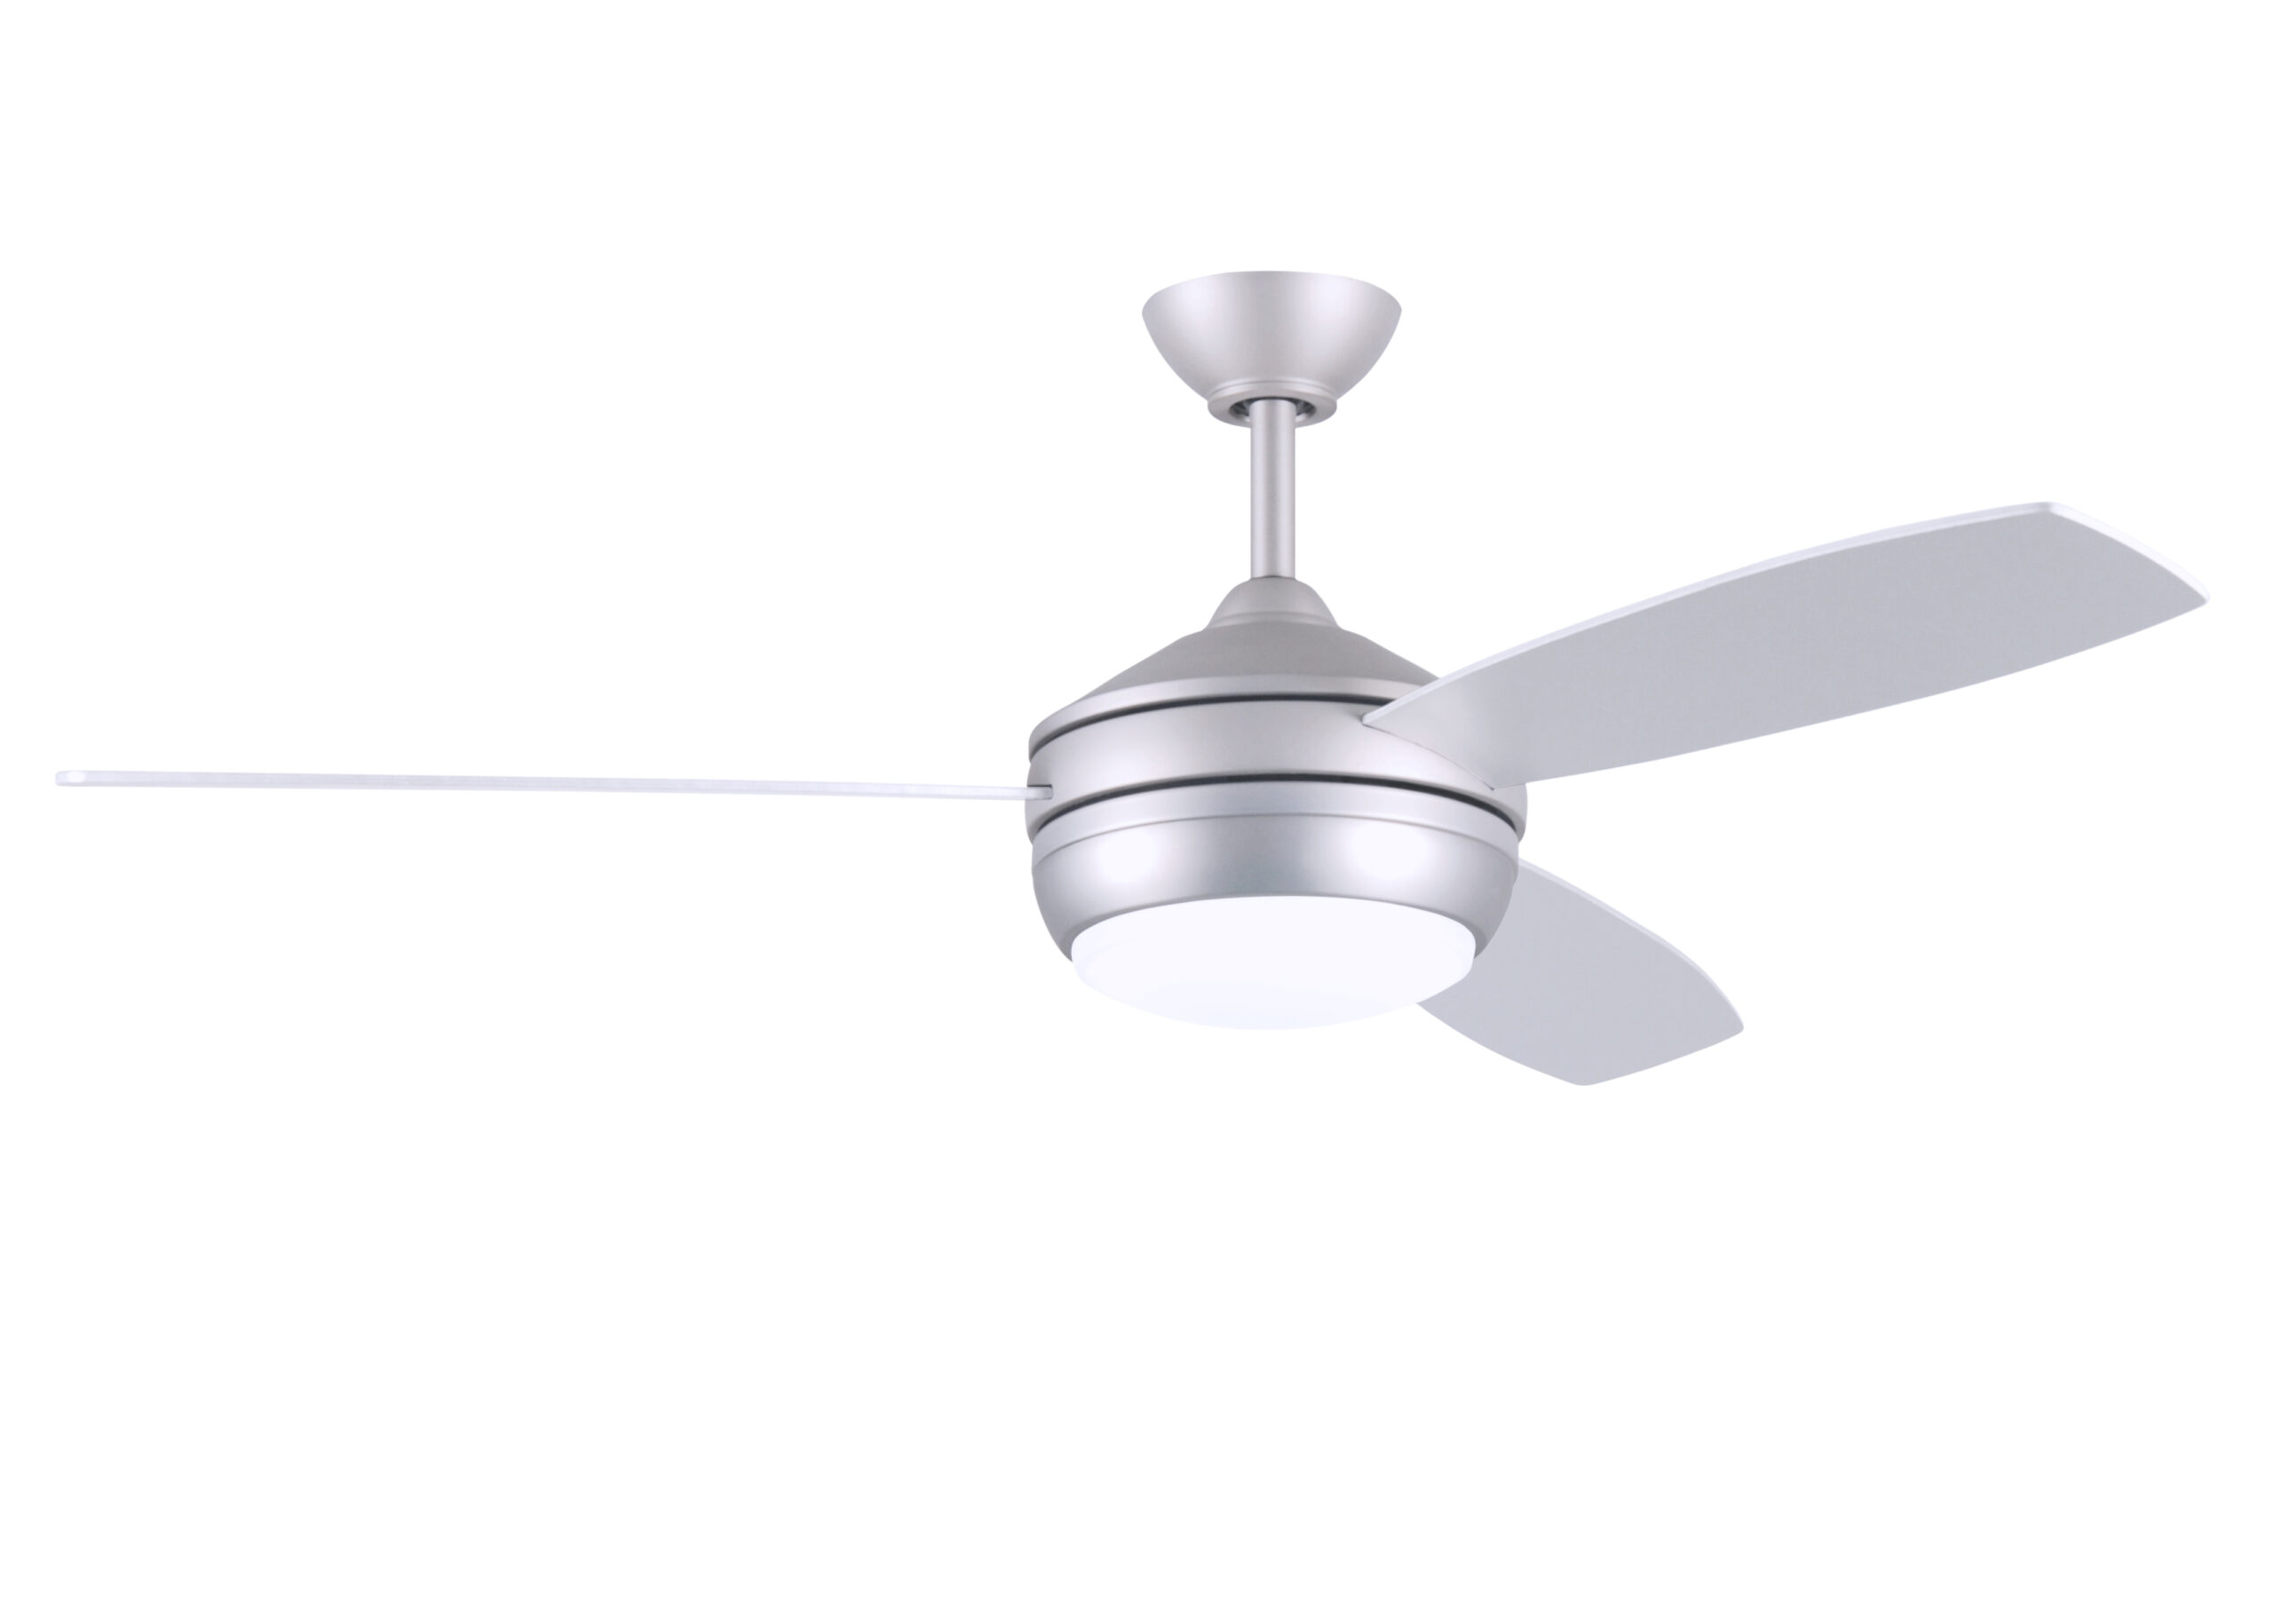 T-24 ceiling fan in Brushed Nickel with 52" Brushed Nickel rever